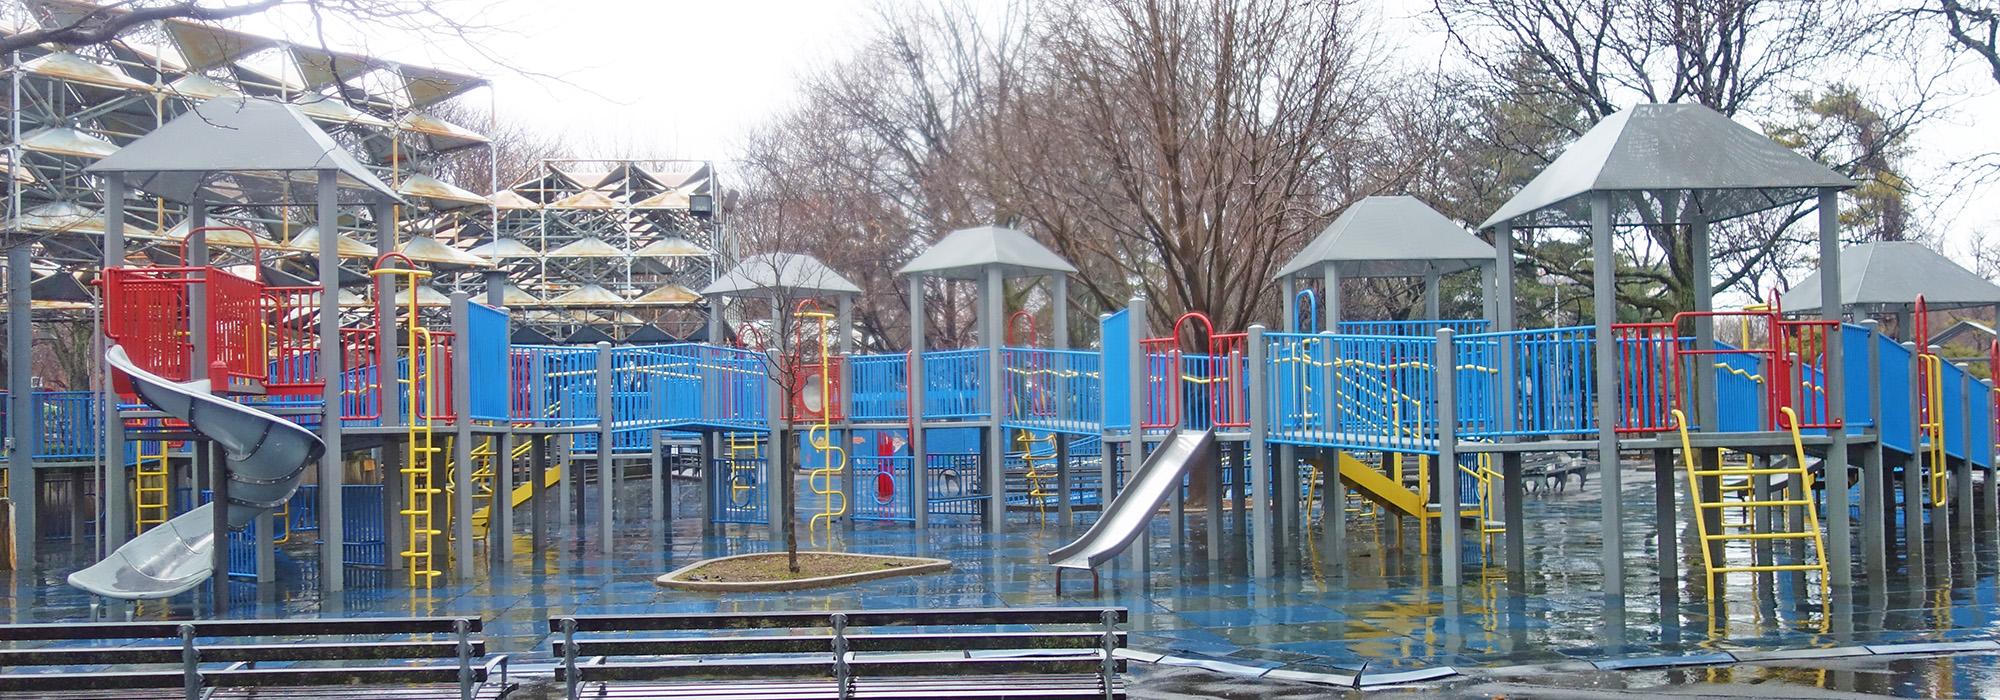 Playground For All Children, Queens, NY